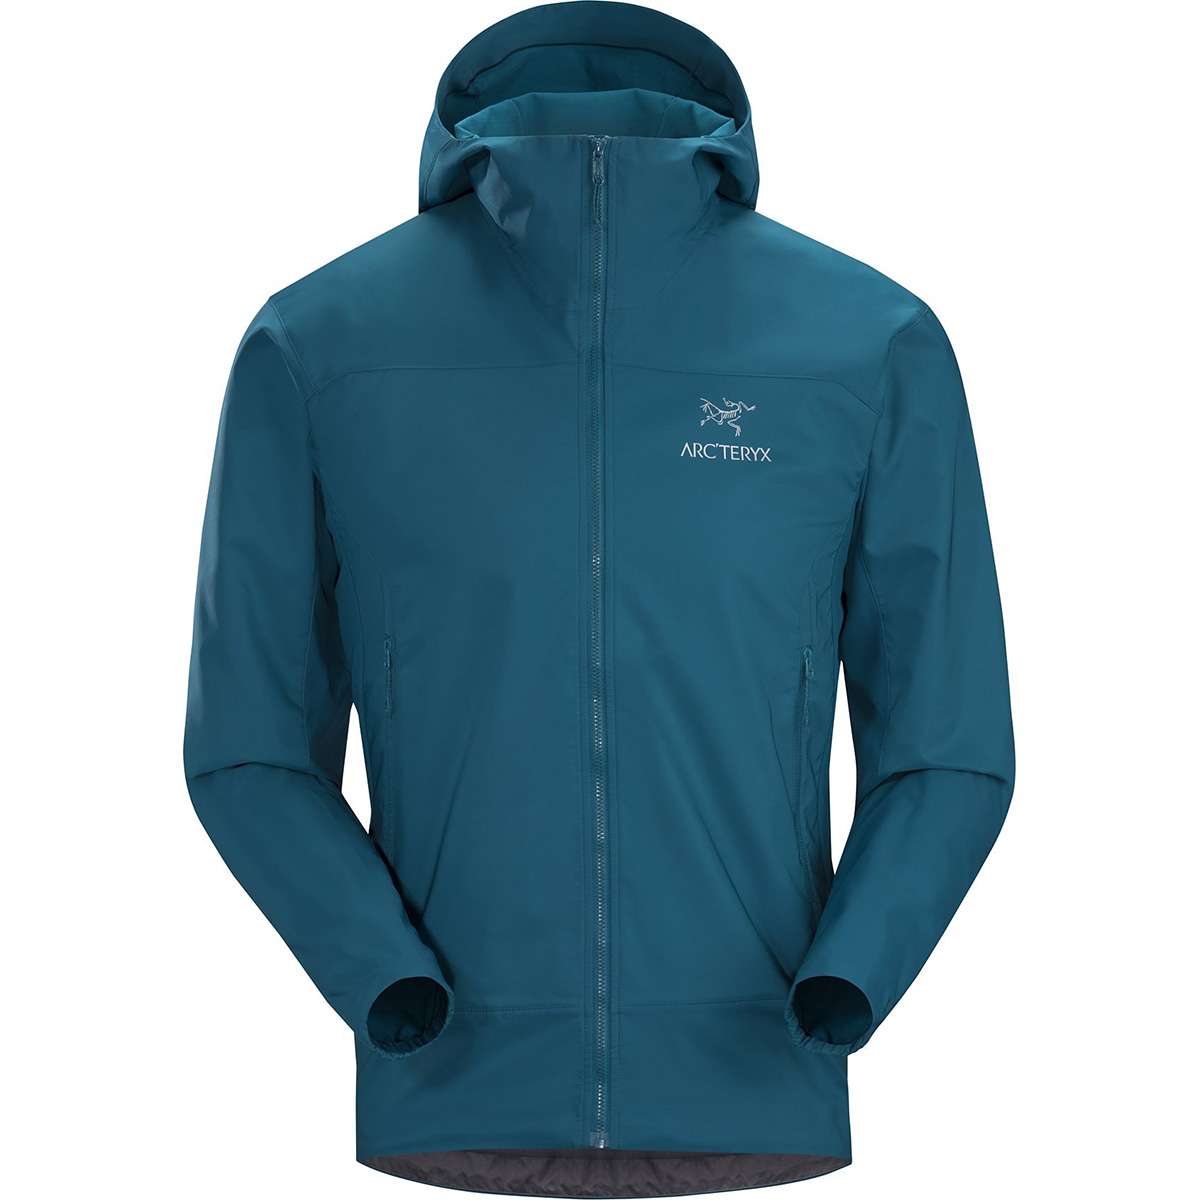 Arc'teryx Tenquille Hoody, men's, discontinued Spring 2018 colors (free ...